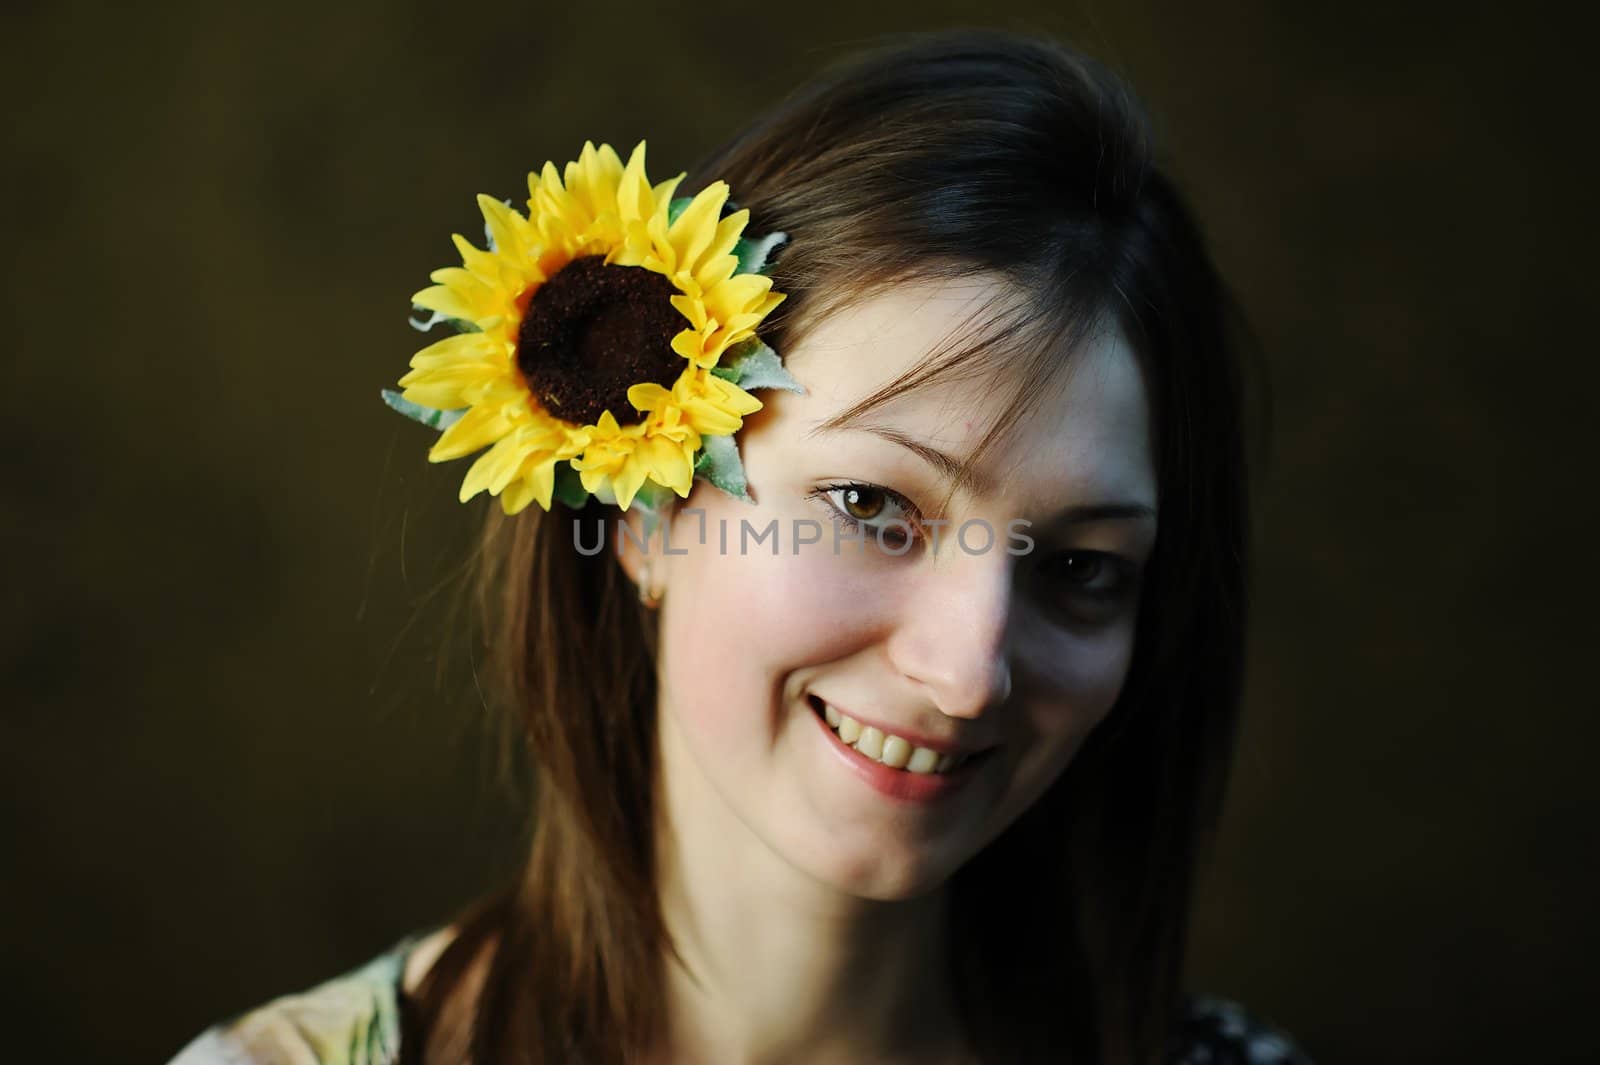 A beautiful woman with yellow sunflower in her hair